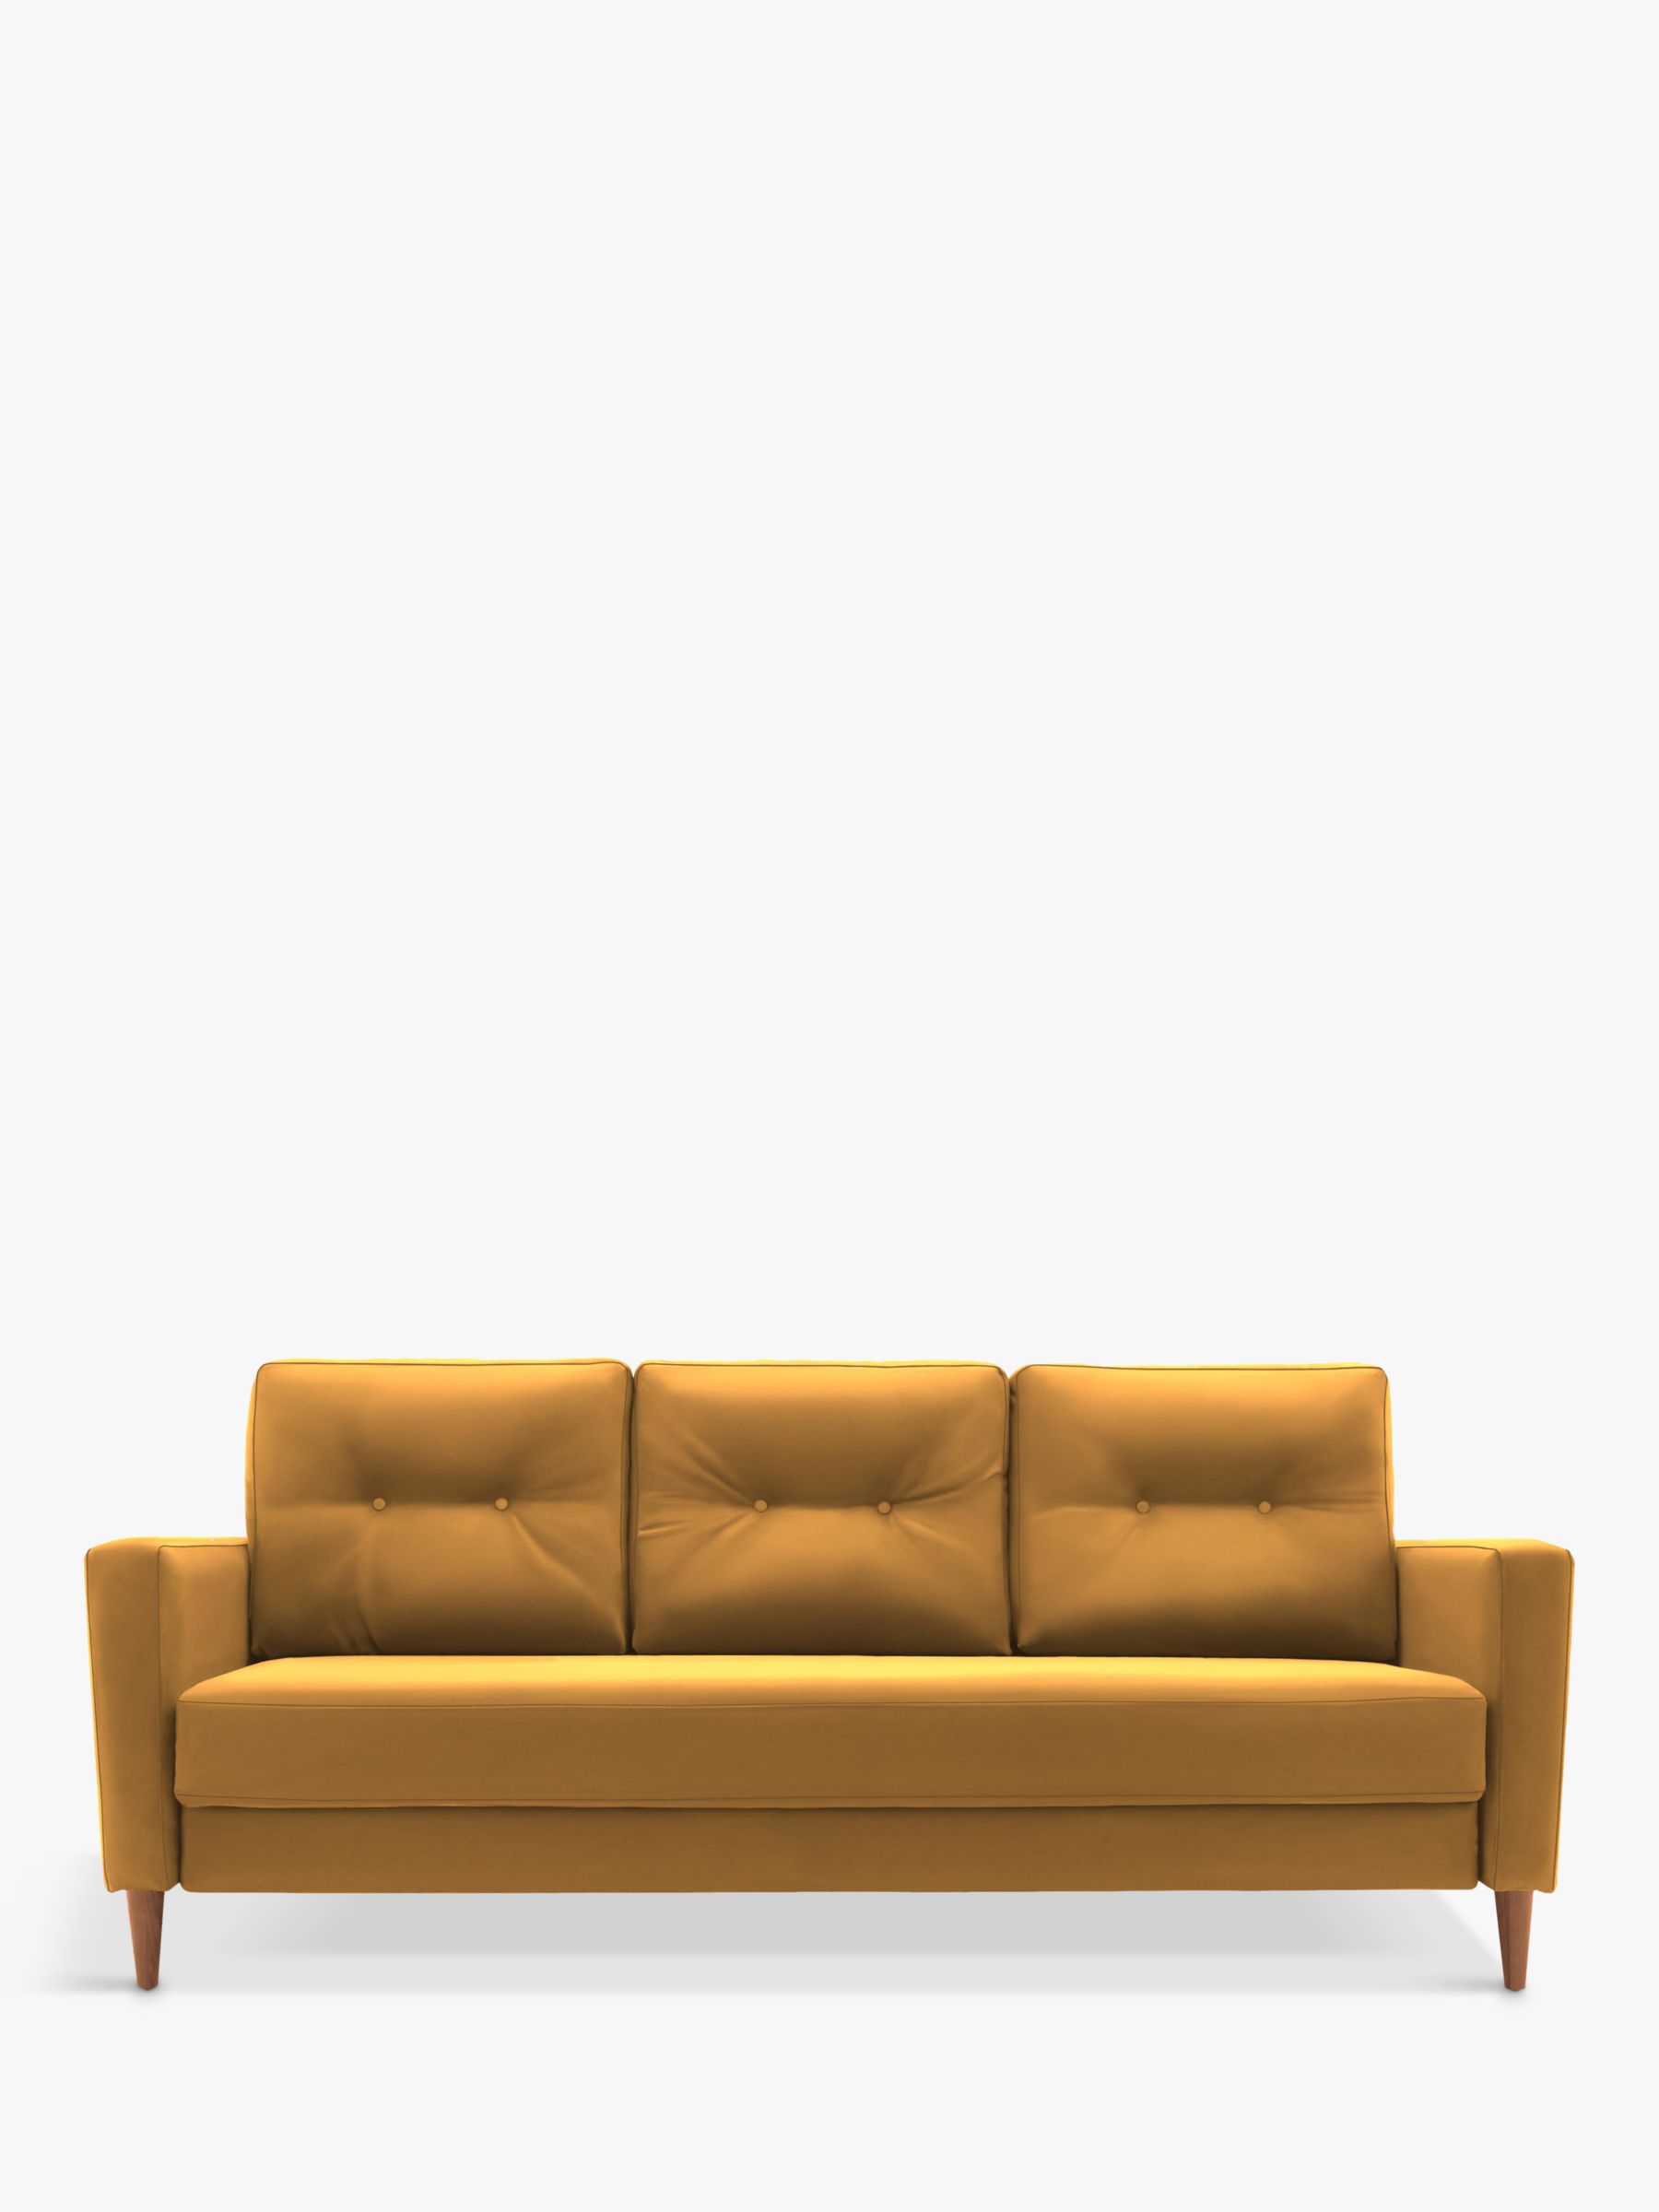 The Fifty Four Range, G Plan Vintage The Fifty Four Large 3 Seater Sofa Bed, Plush Turmeric